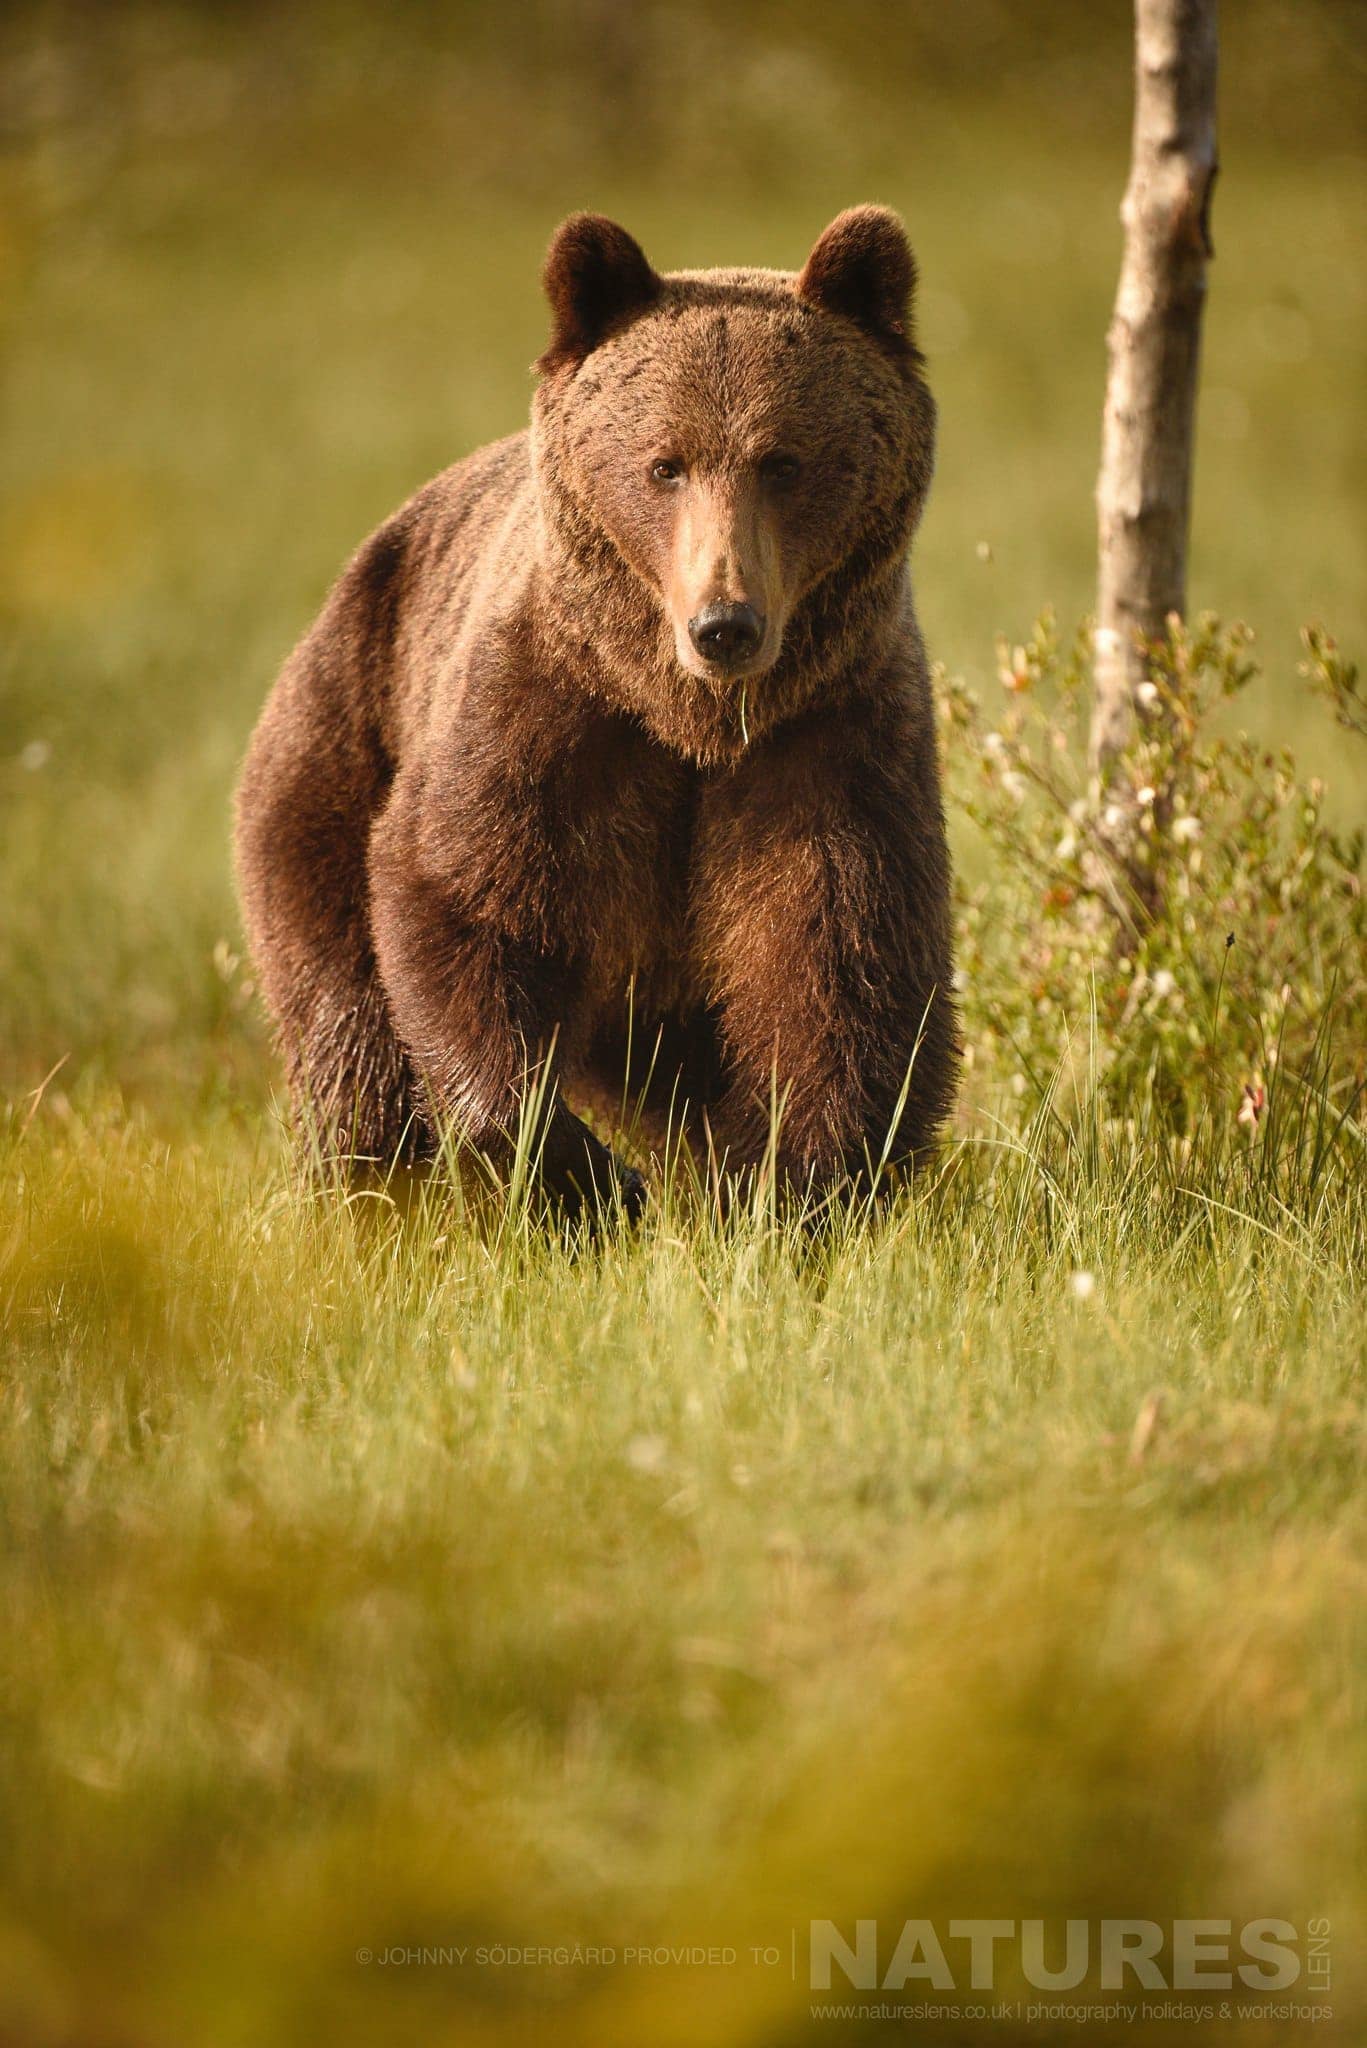 One Of The Large Bears Bathed In Golden Light Amongst The Cotton Grass Photographed By Johnny Södergård During The Natureslens Wild Brown Bears Of Finland Photography Holiday